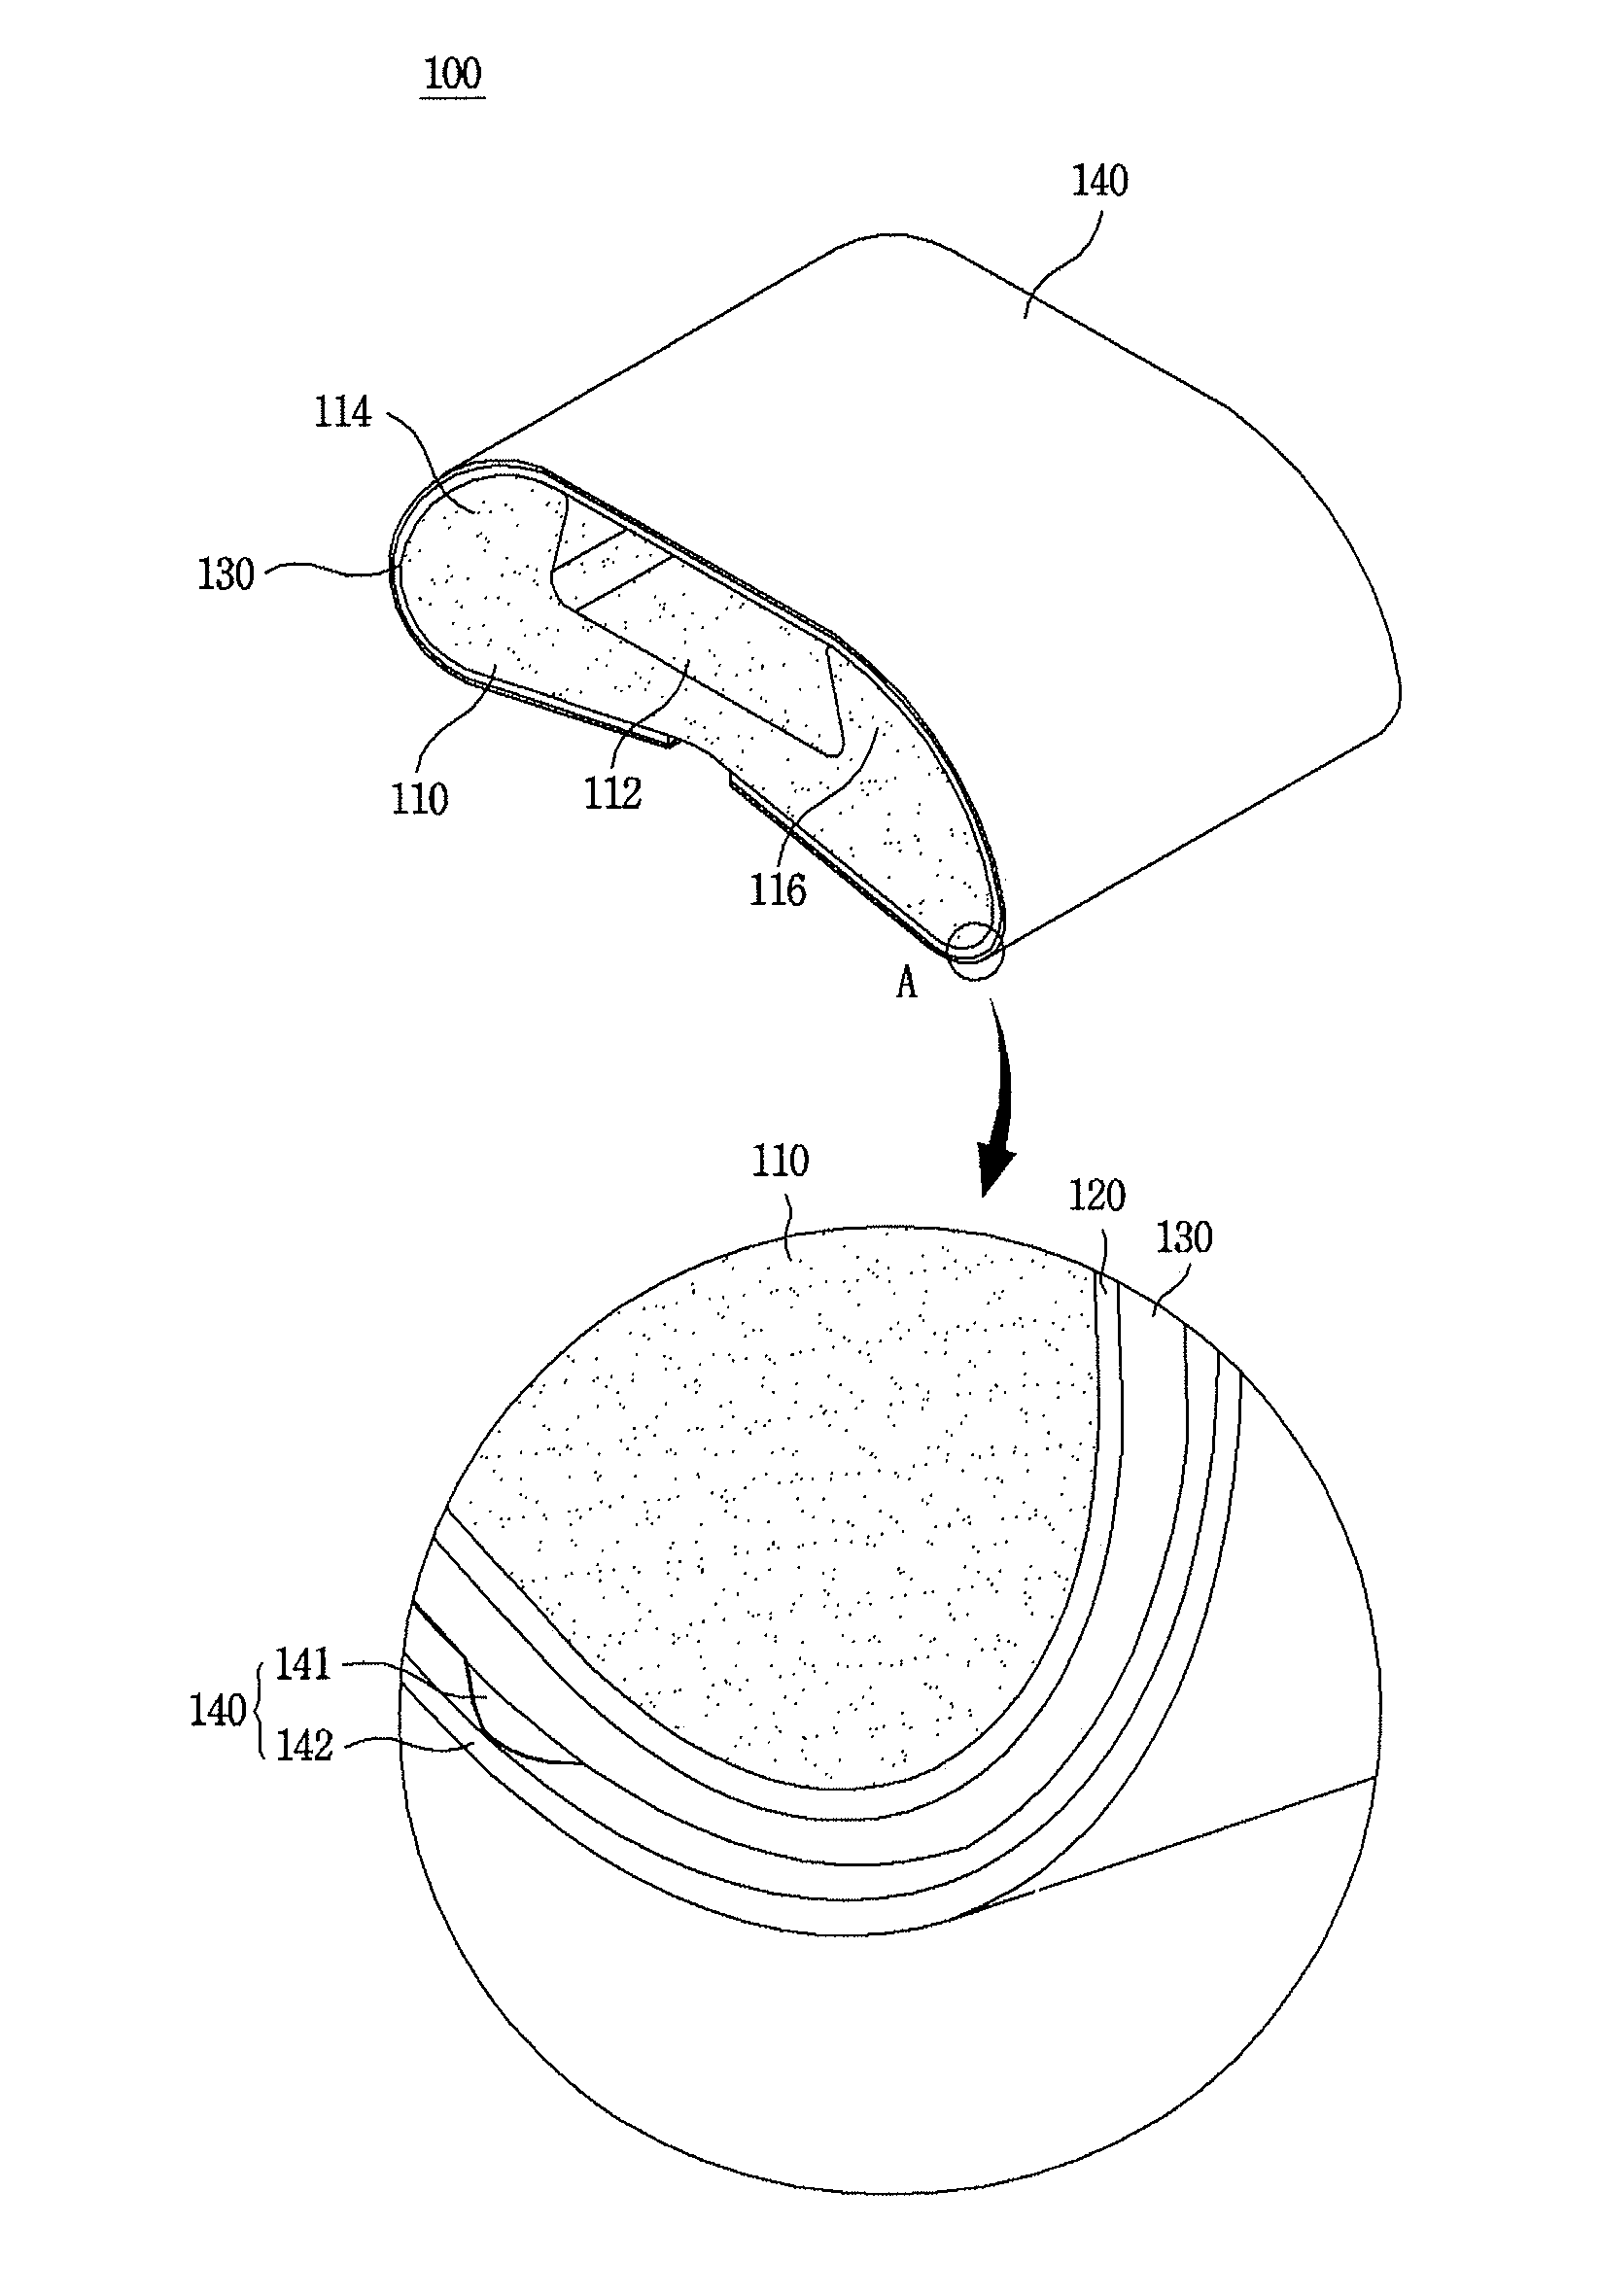 Elastic electric contact terminal adapted to small size